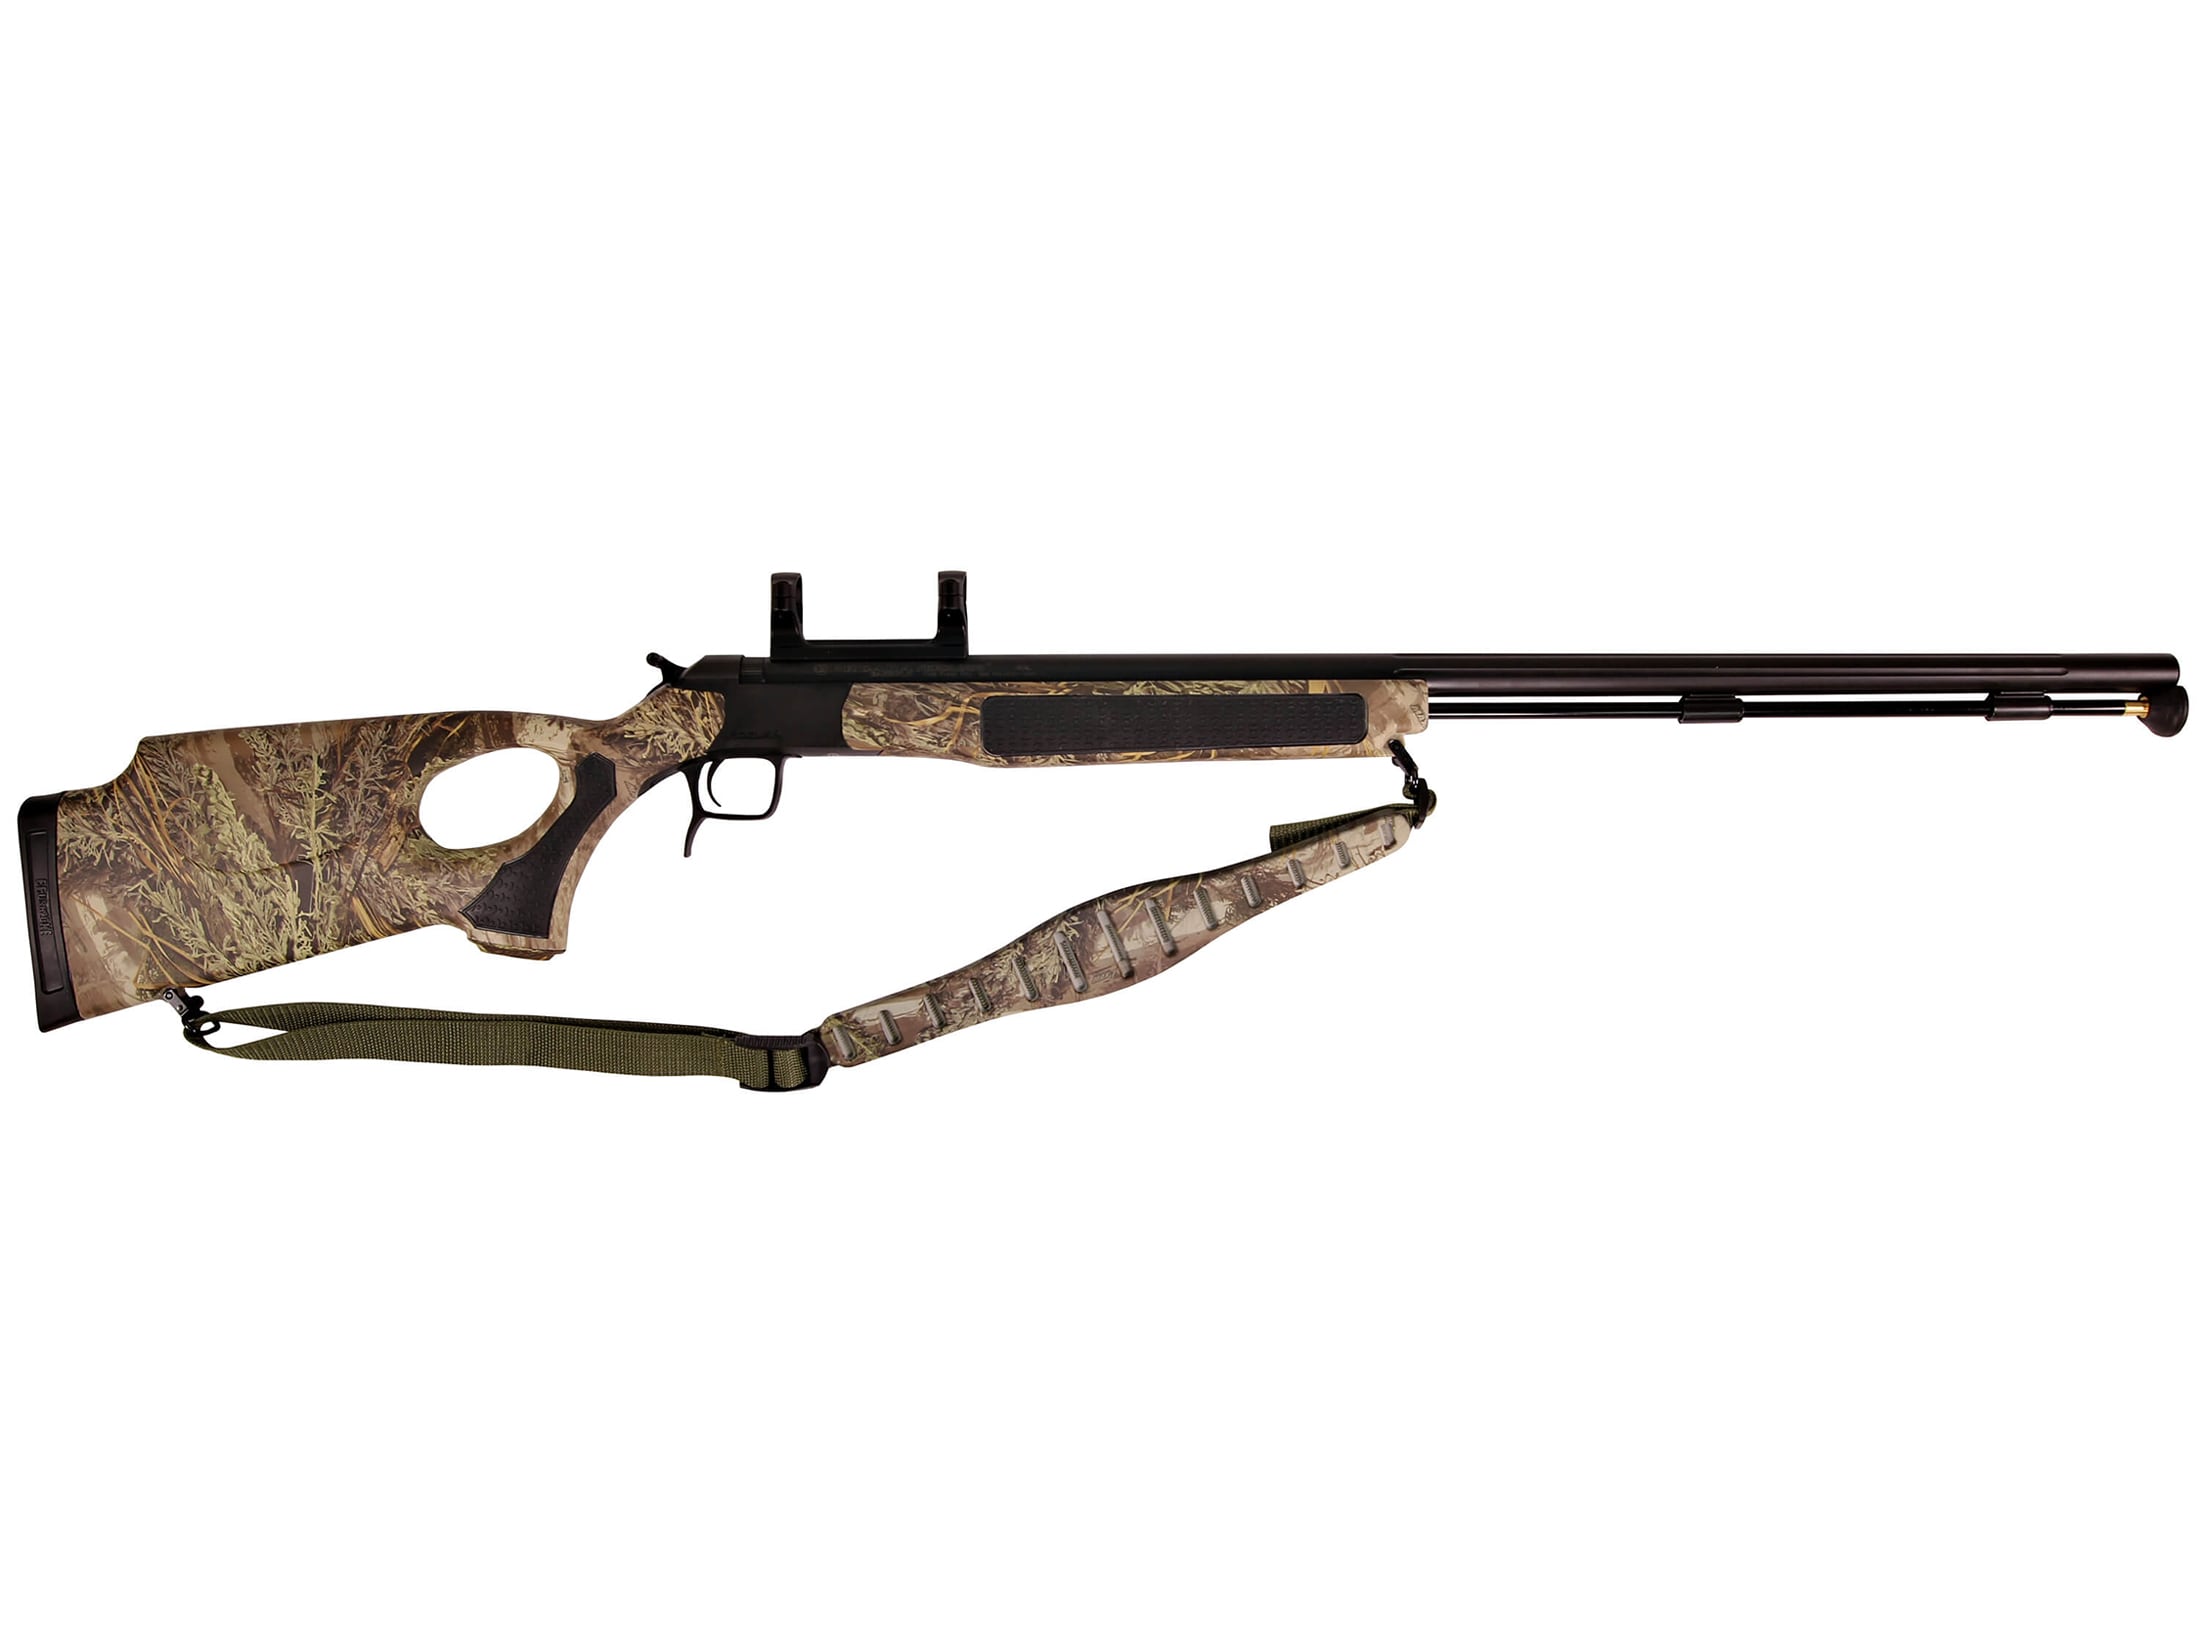 Image of CVA Accura V2/LR Muzzleloading Rifle with Dead-On Scope Mount 30" Fluted Black Nitride Stainless Steel Barrel Synthetic Thumbhole Stock Max-1